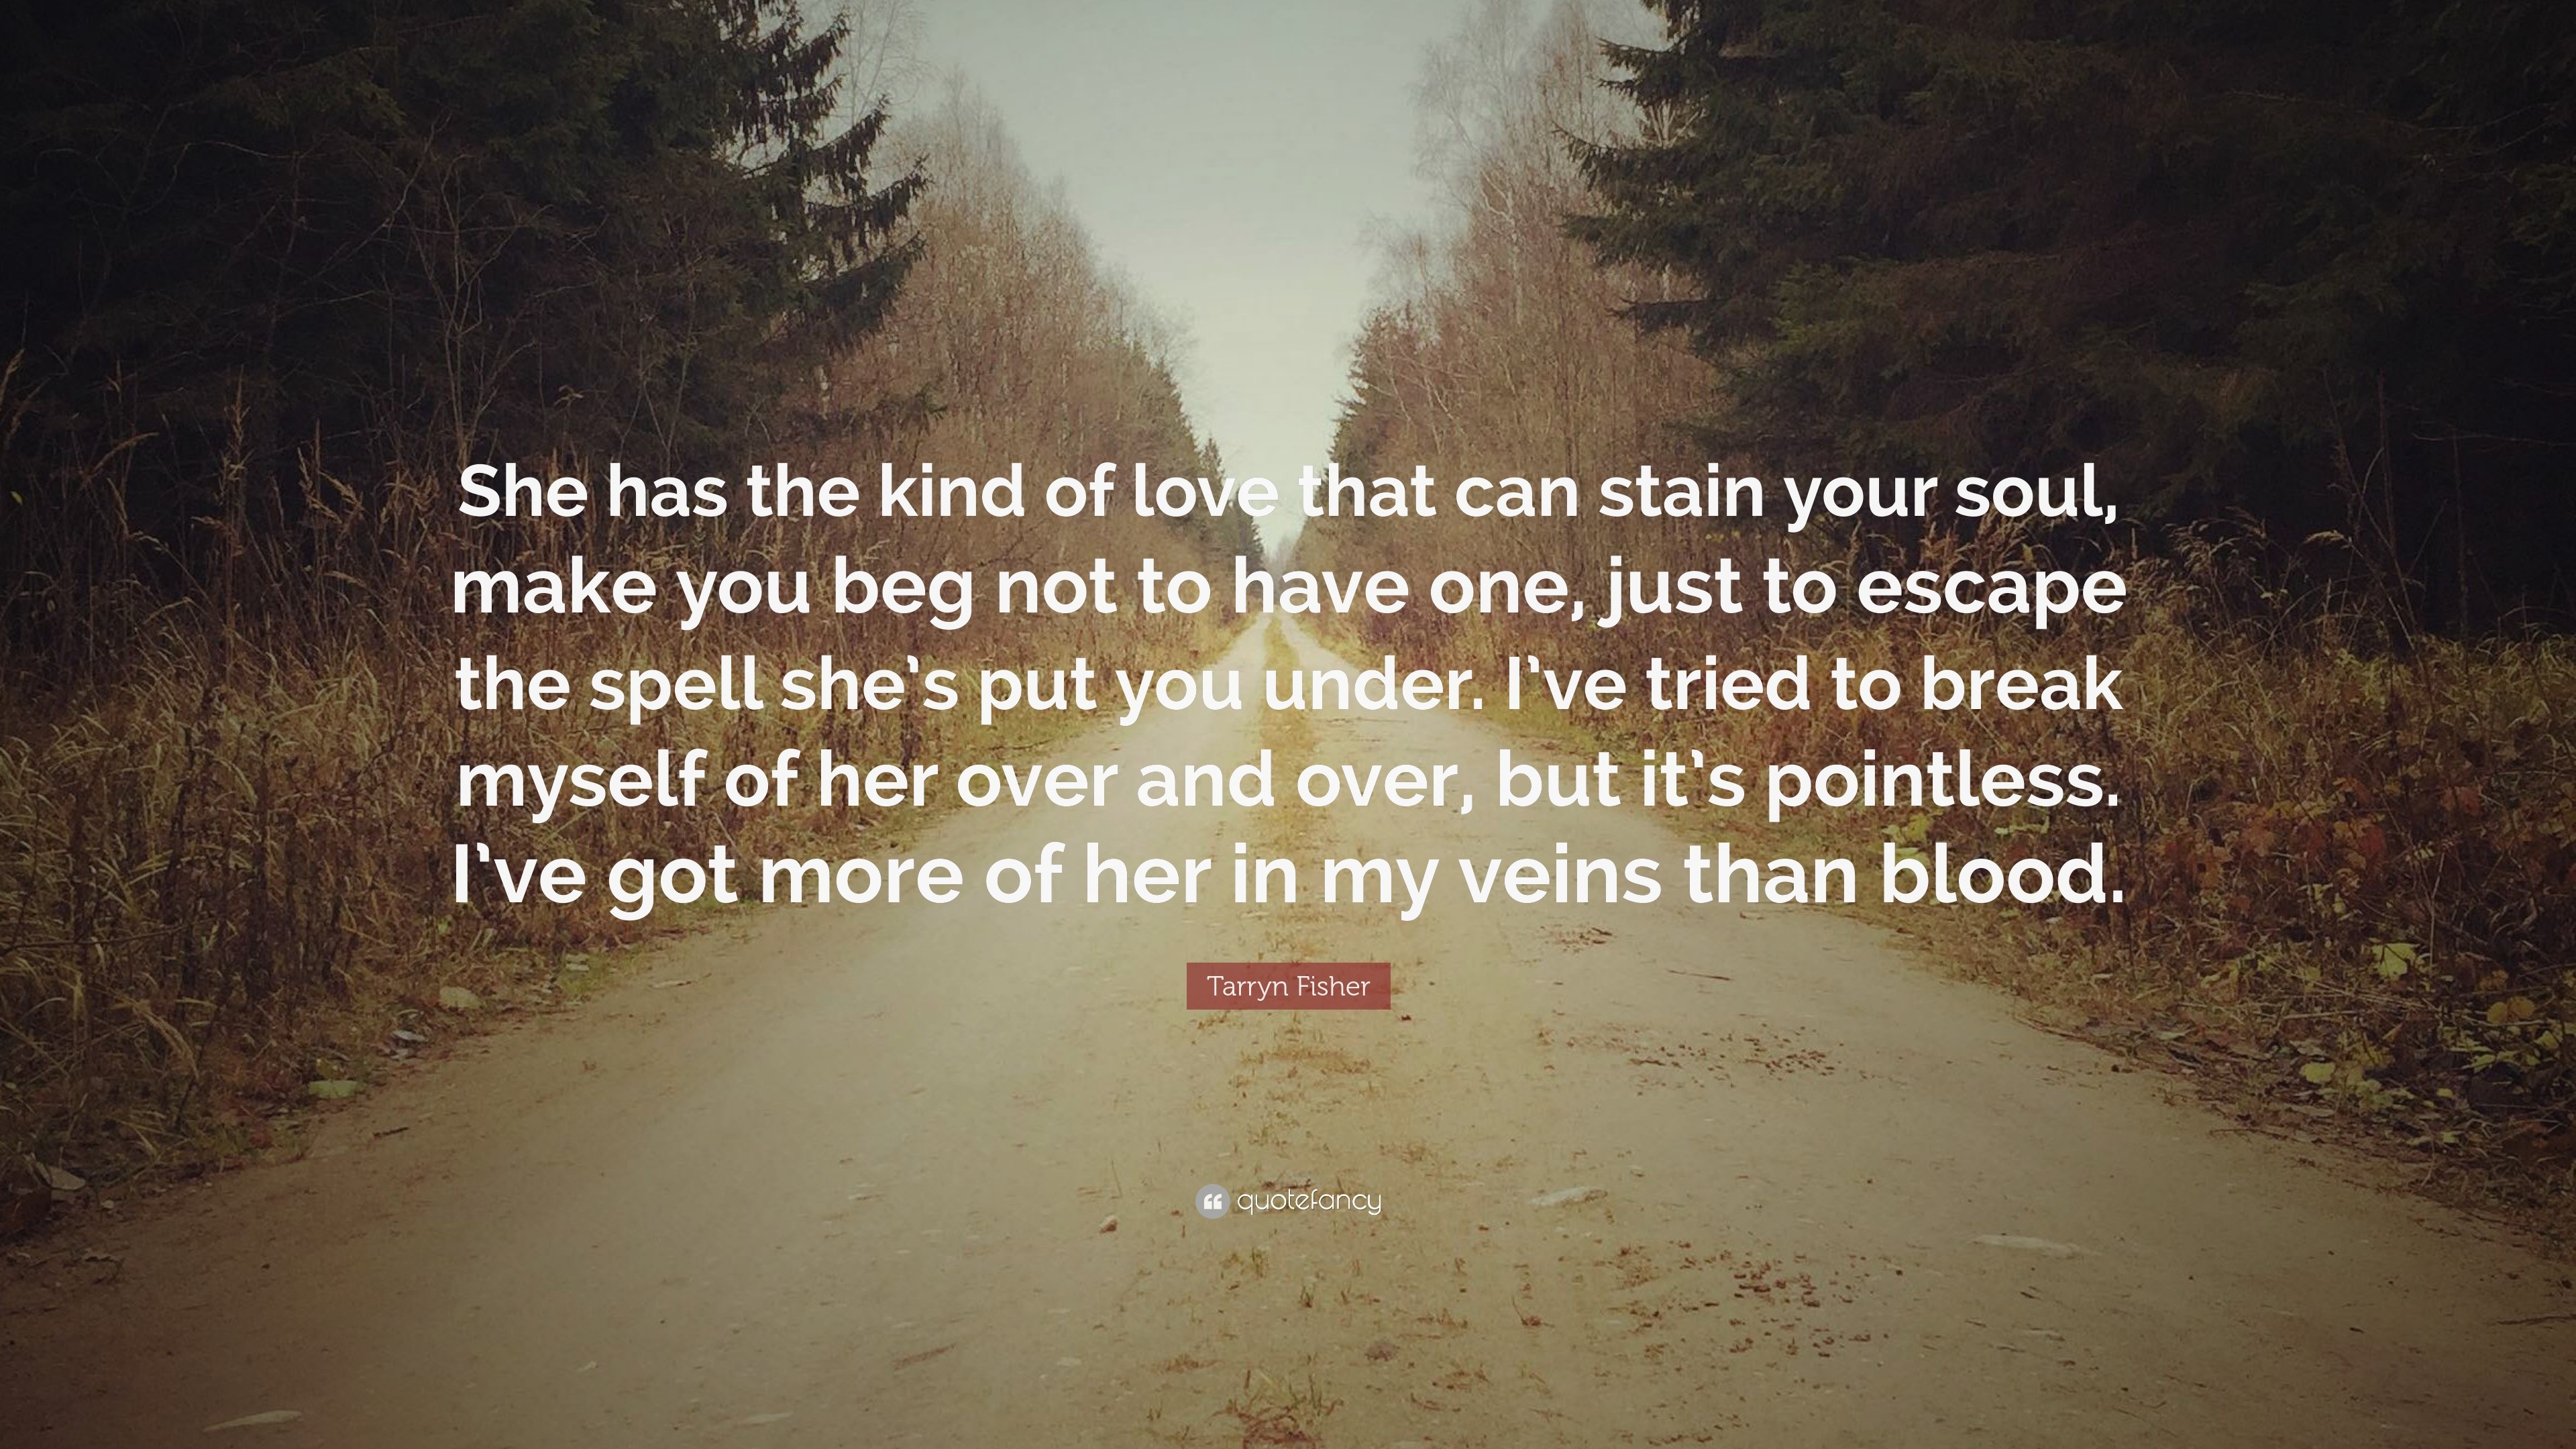 Tarryn Fisher Quote: “She has the kind of love that can stain your soul ...